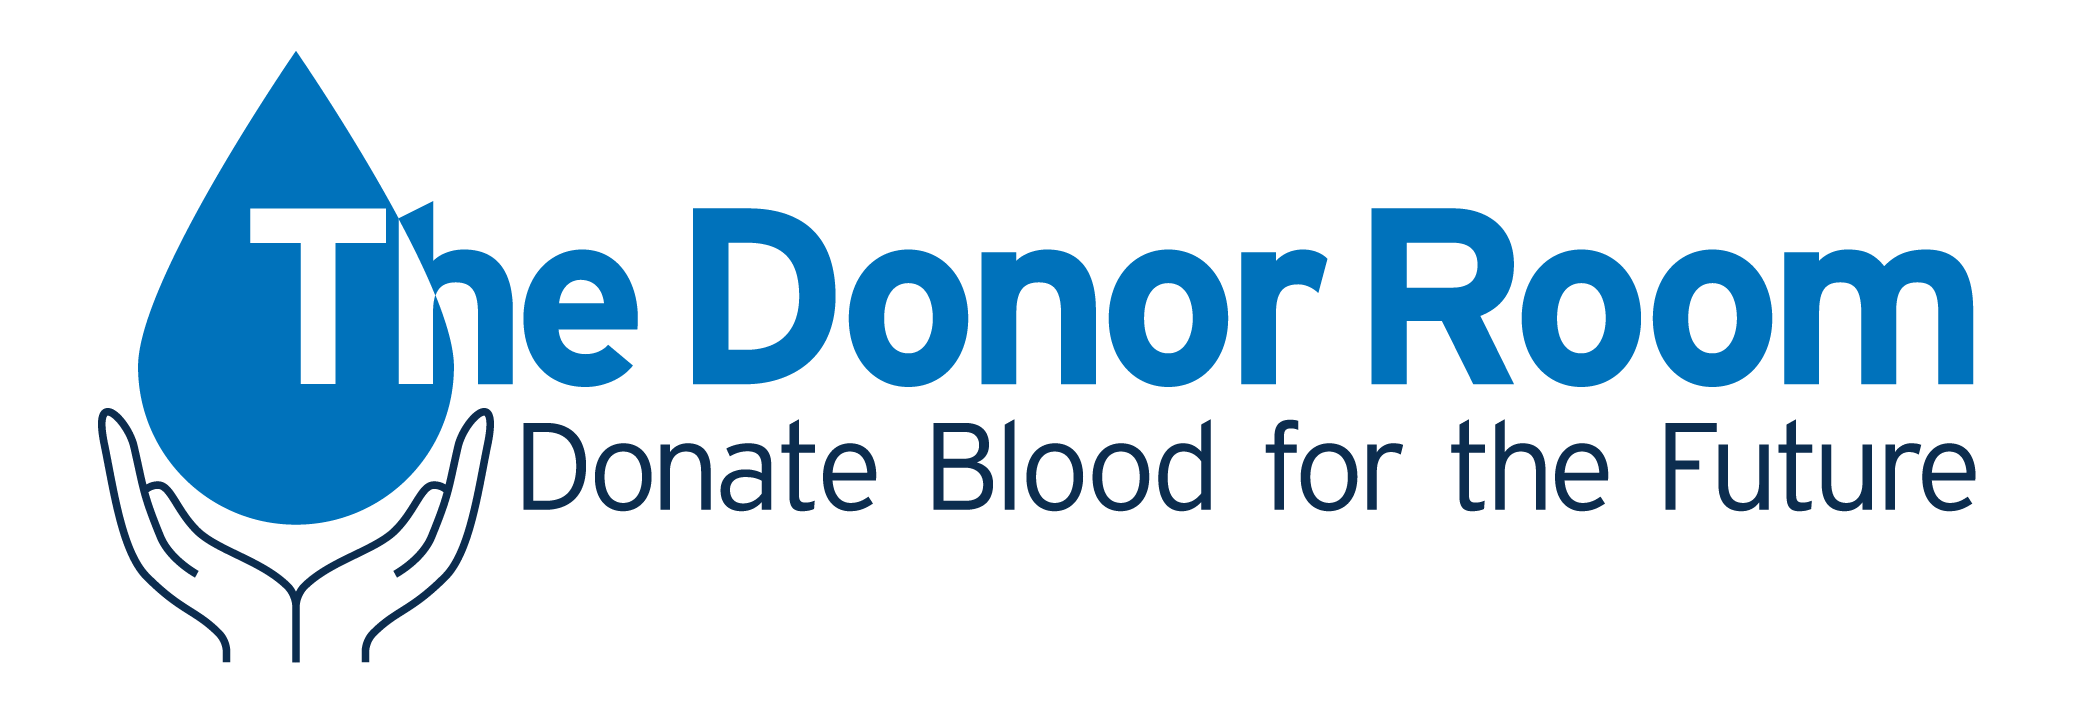 blood donate logo png - Clip Art Library